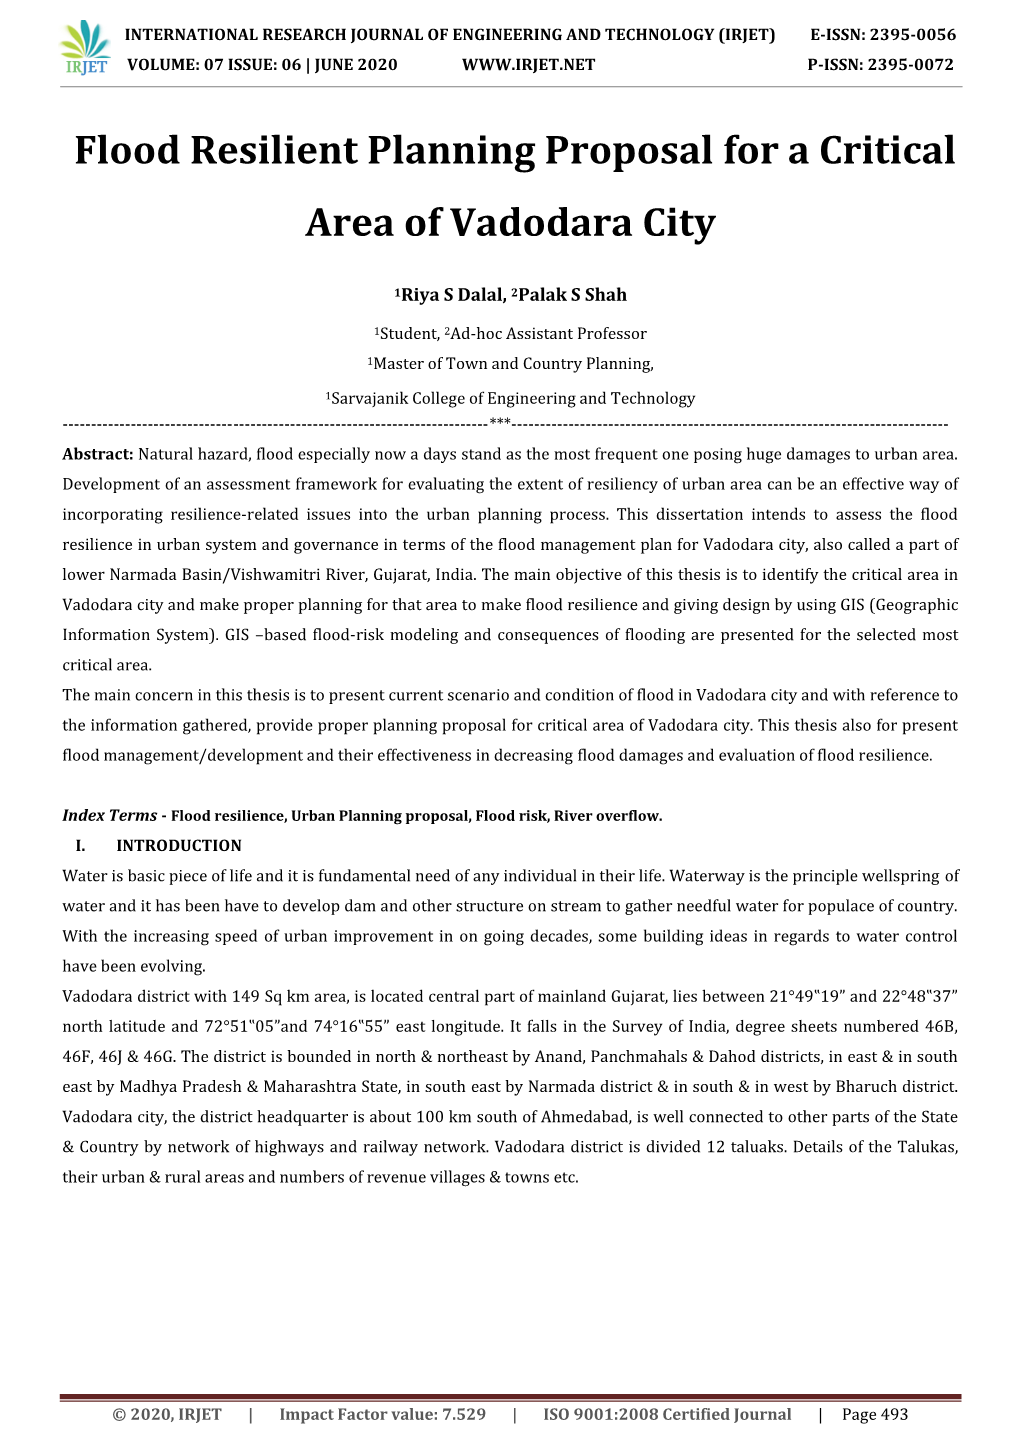 Flood Resilient Planning Proposal for a Critical Area of Vadodara City